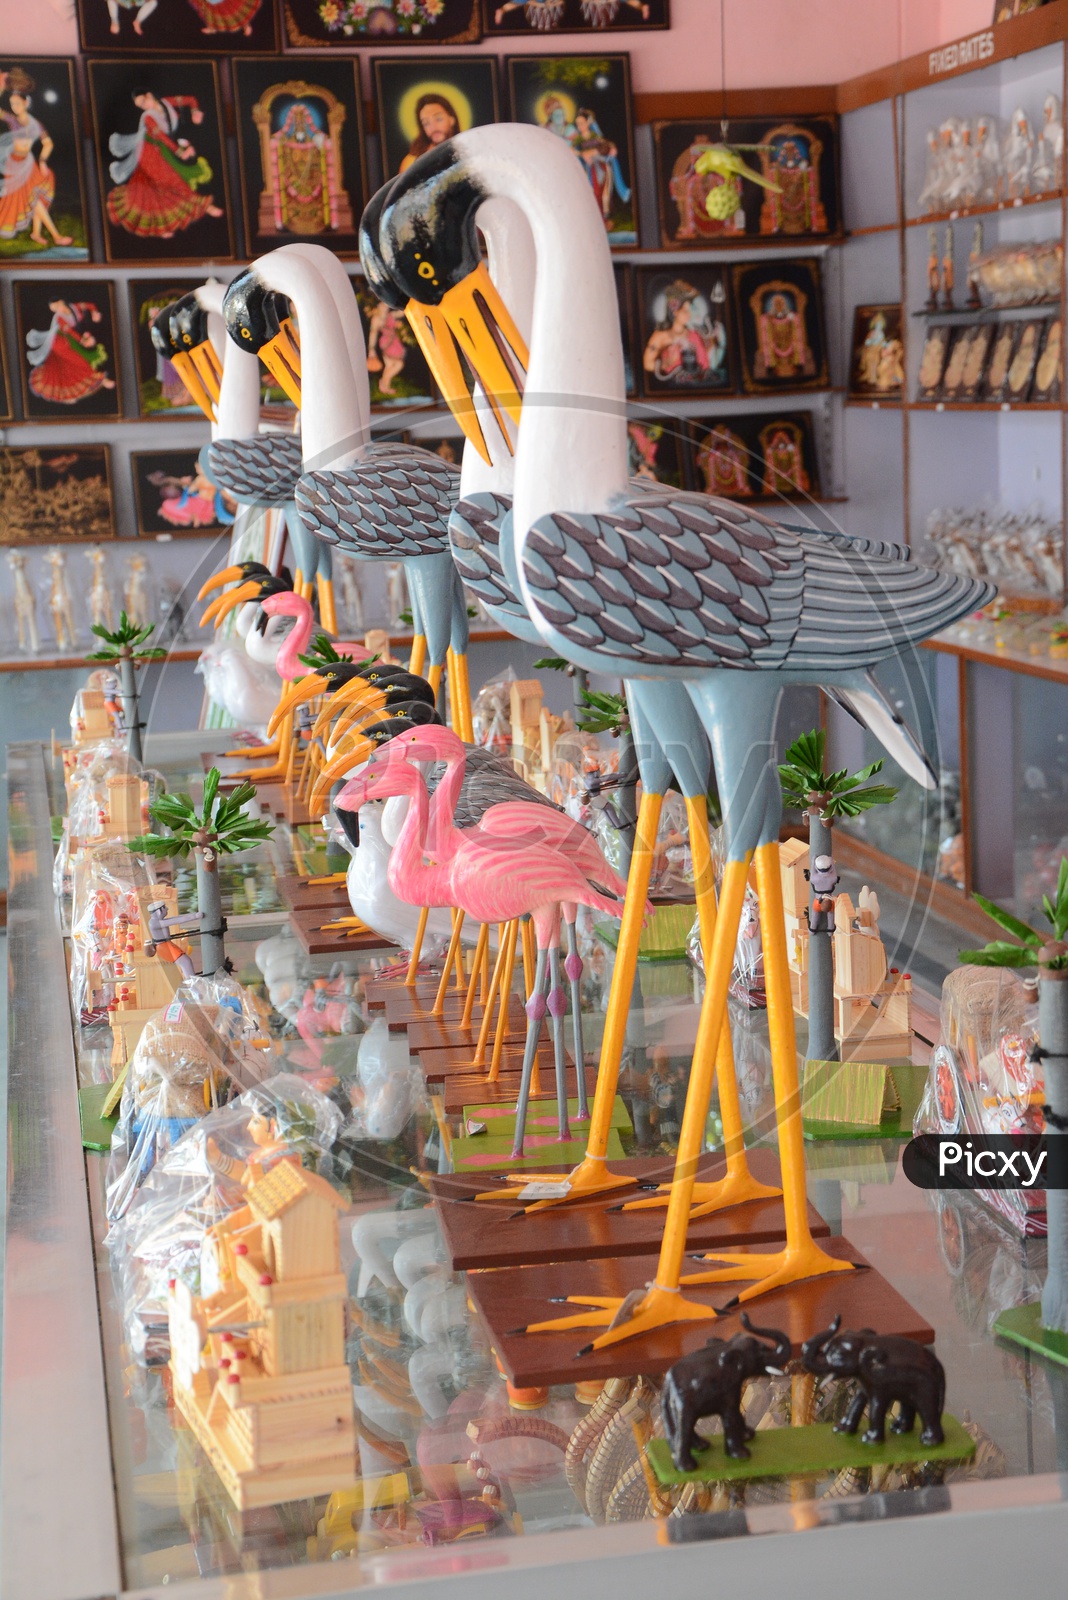 Image of Nirmal Indian Traditional Wooden Crafted Toys Or Birds in Arts &  Crafts Store-UH018013-Picxy